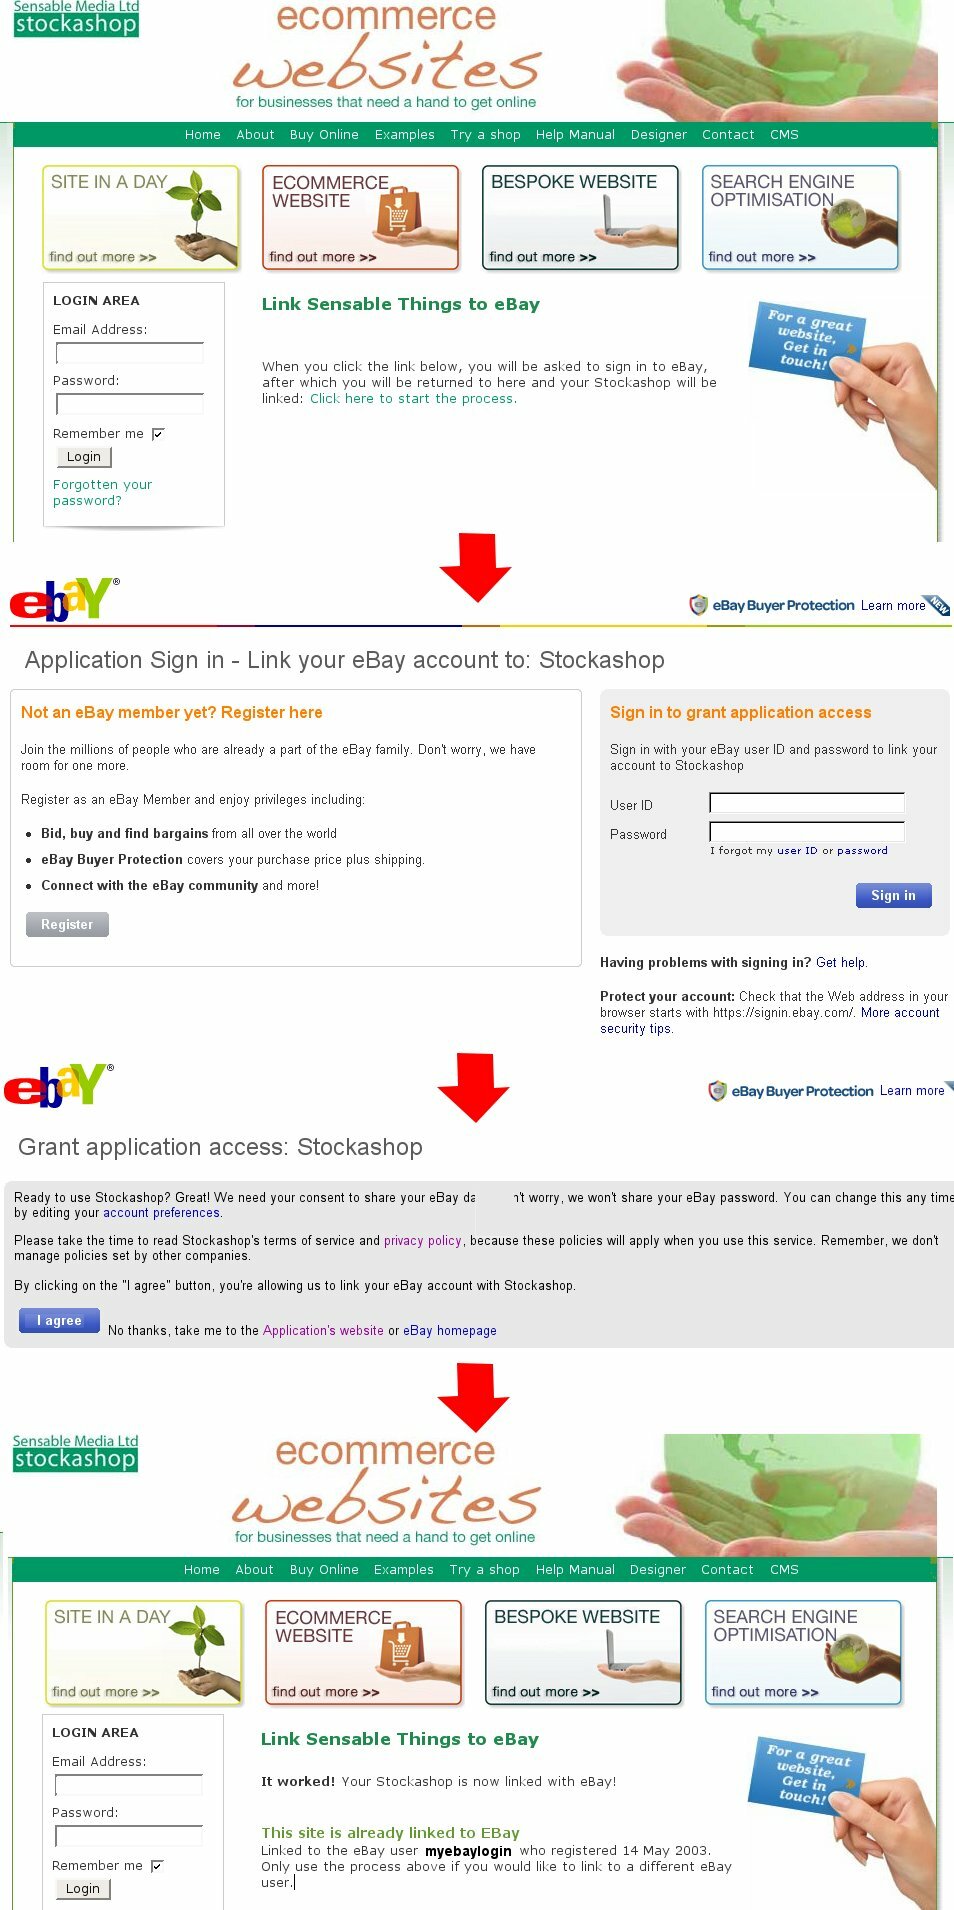 Linking your shop to eBay